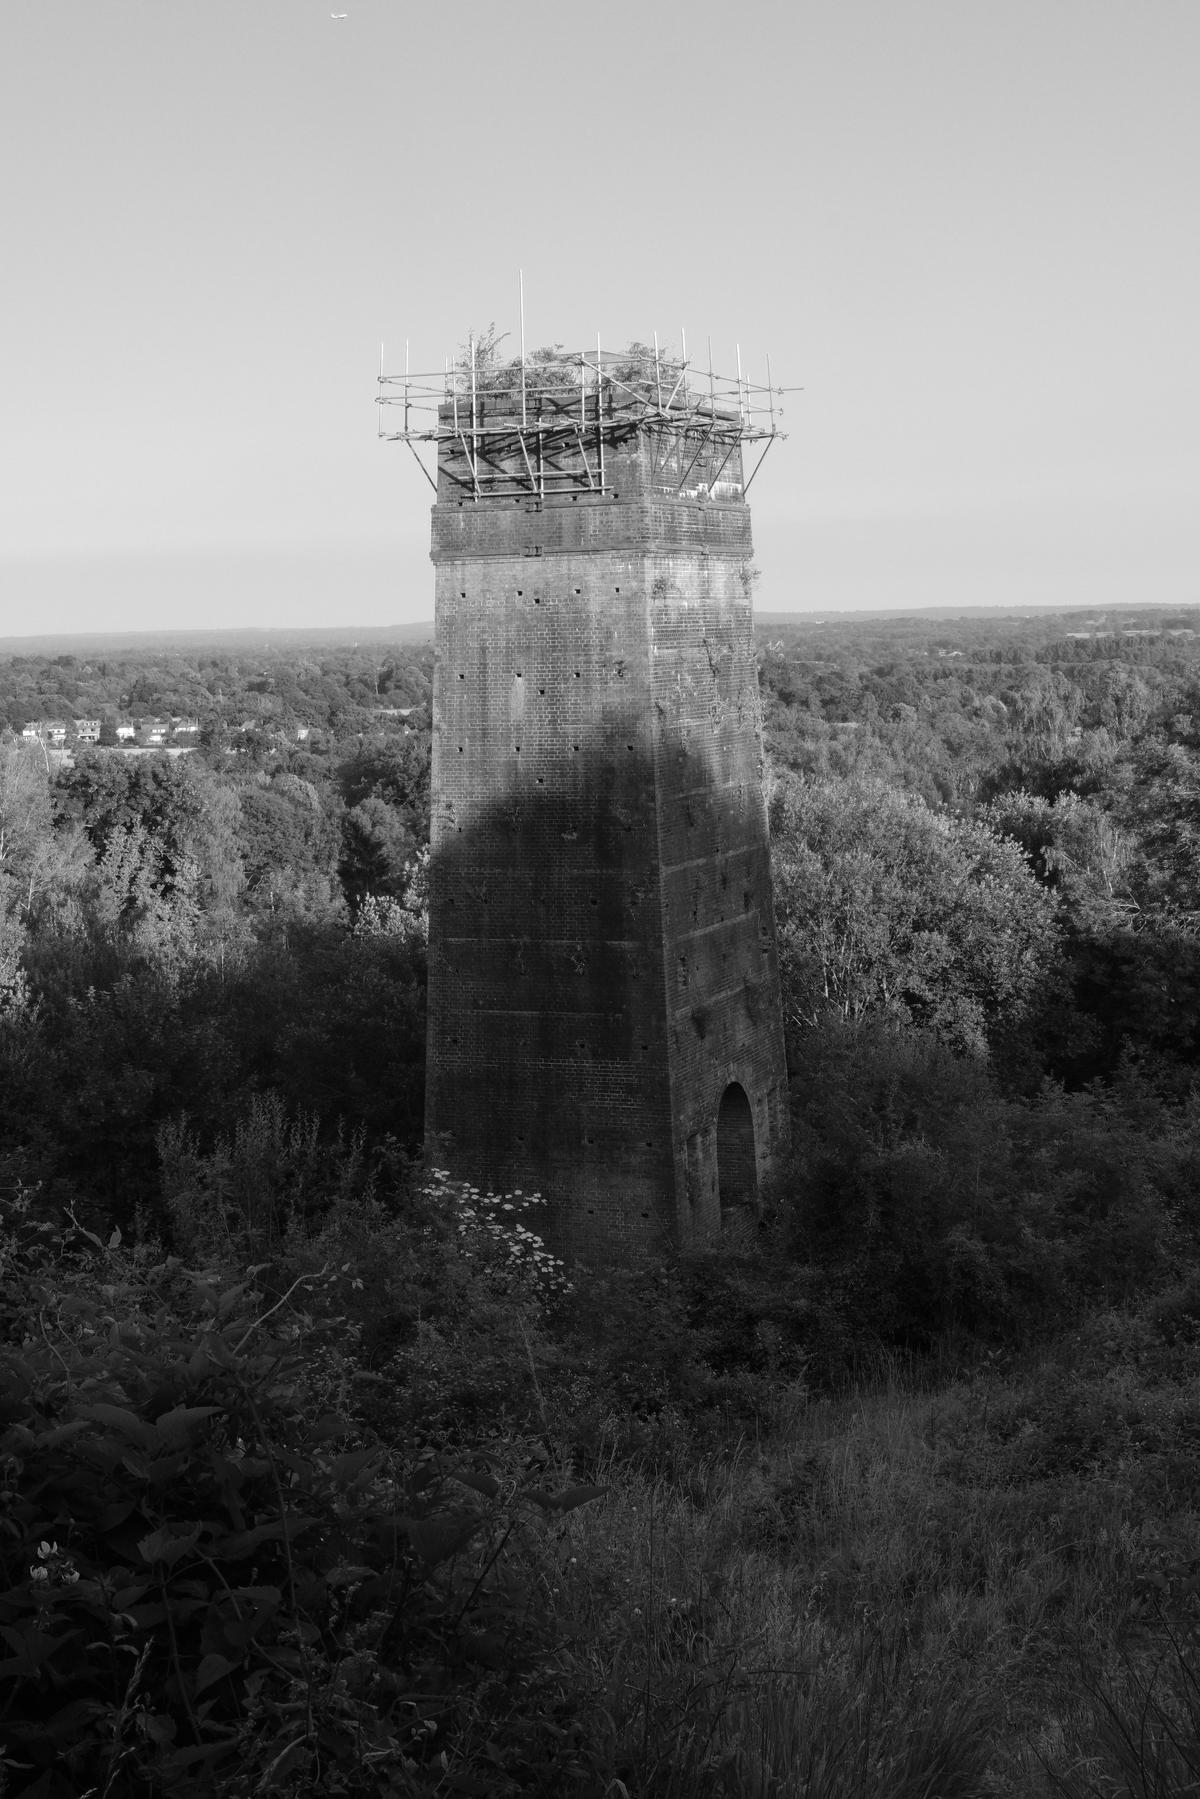 An old abandoned tower is ringed with a crown of scaffolding